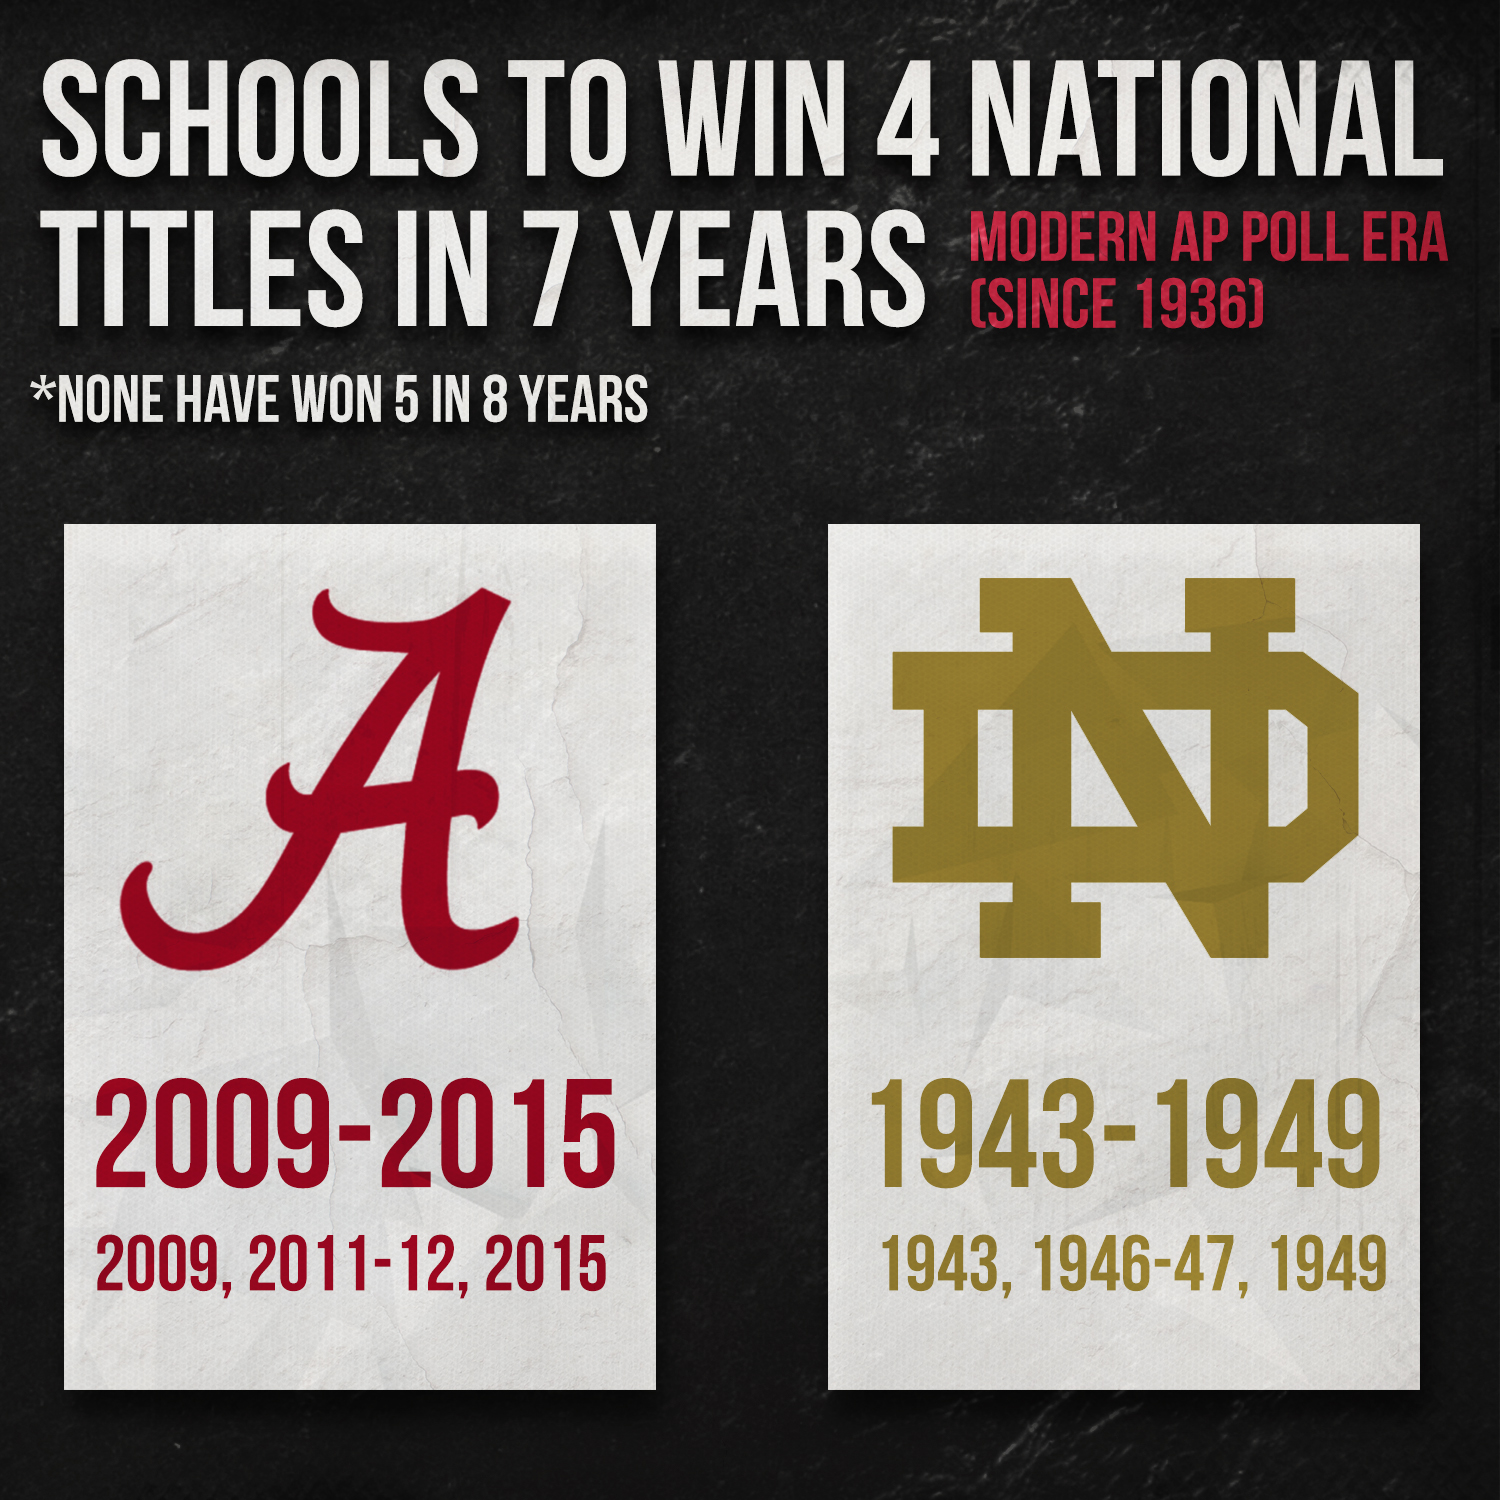 schools-to-win-4-titles-in-7-years